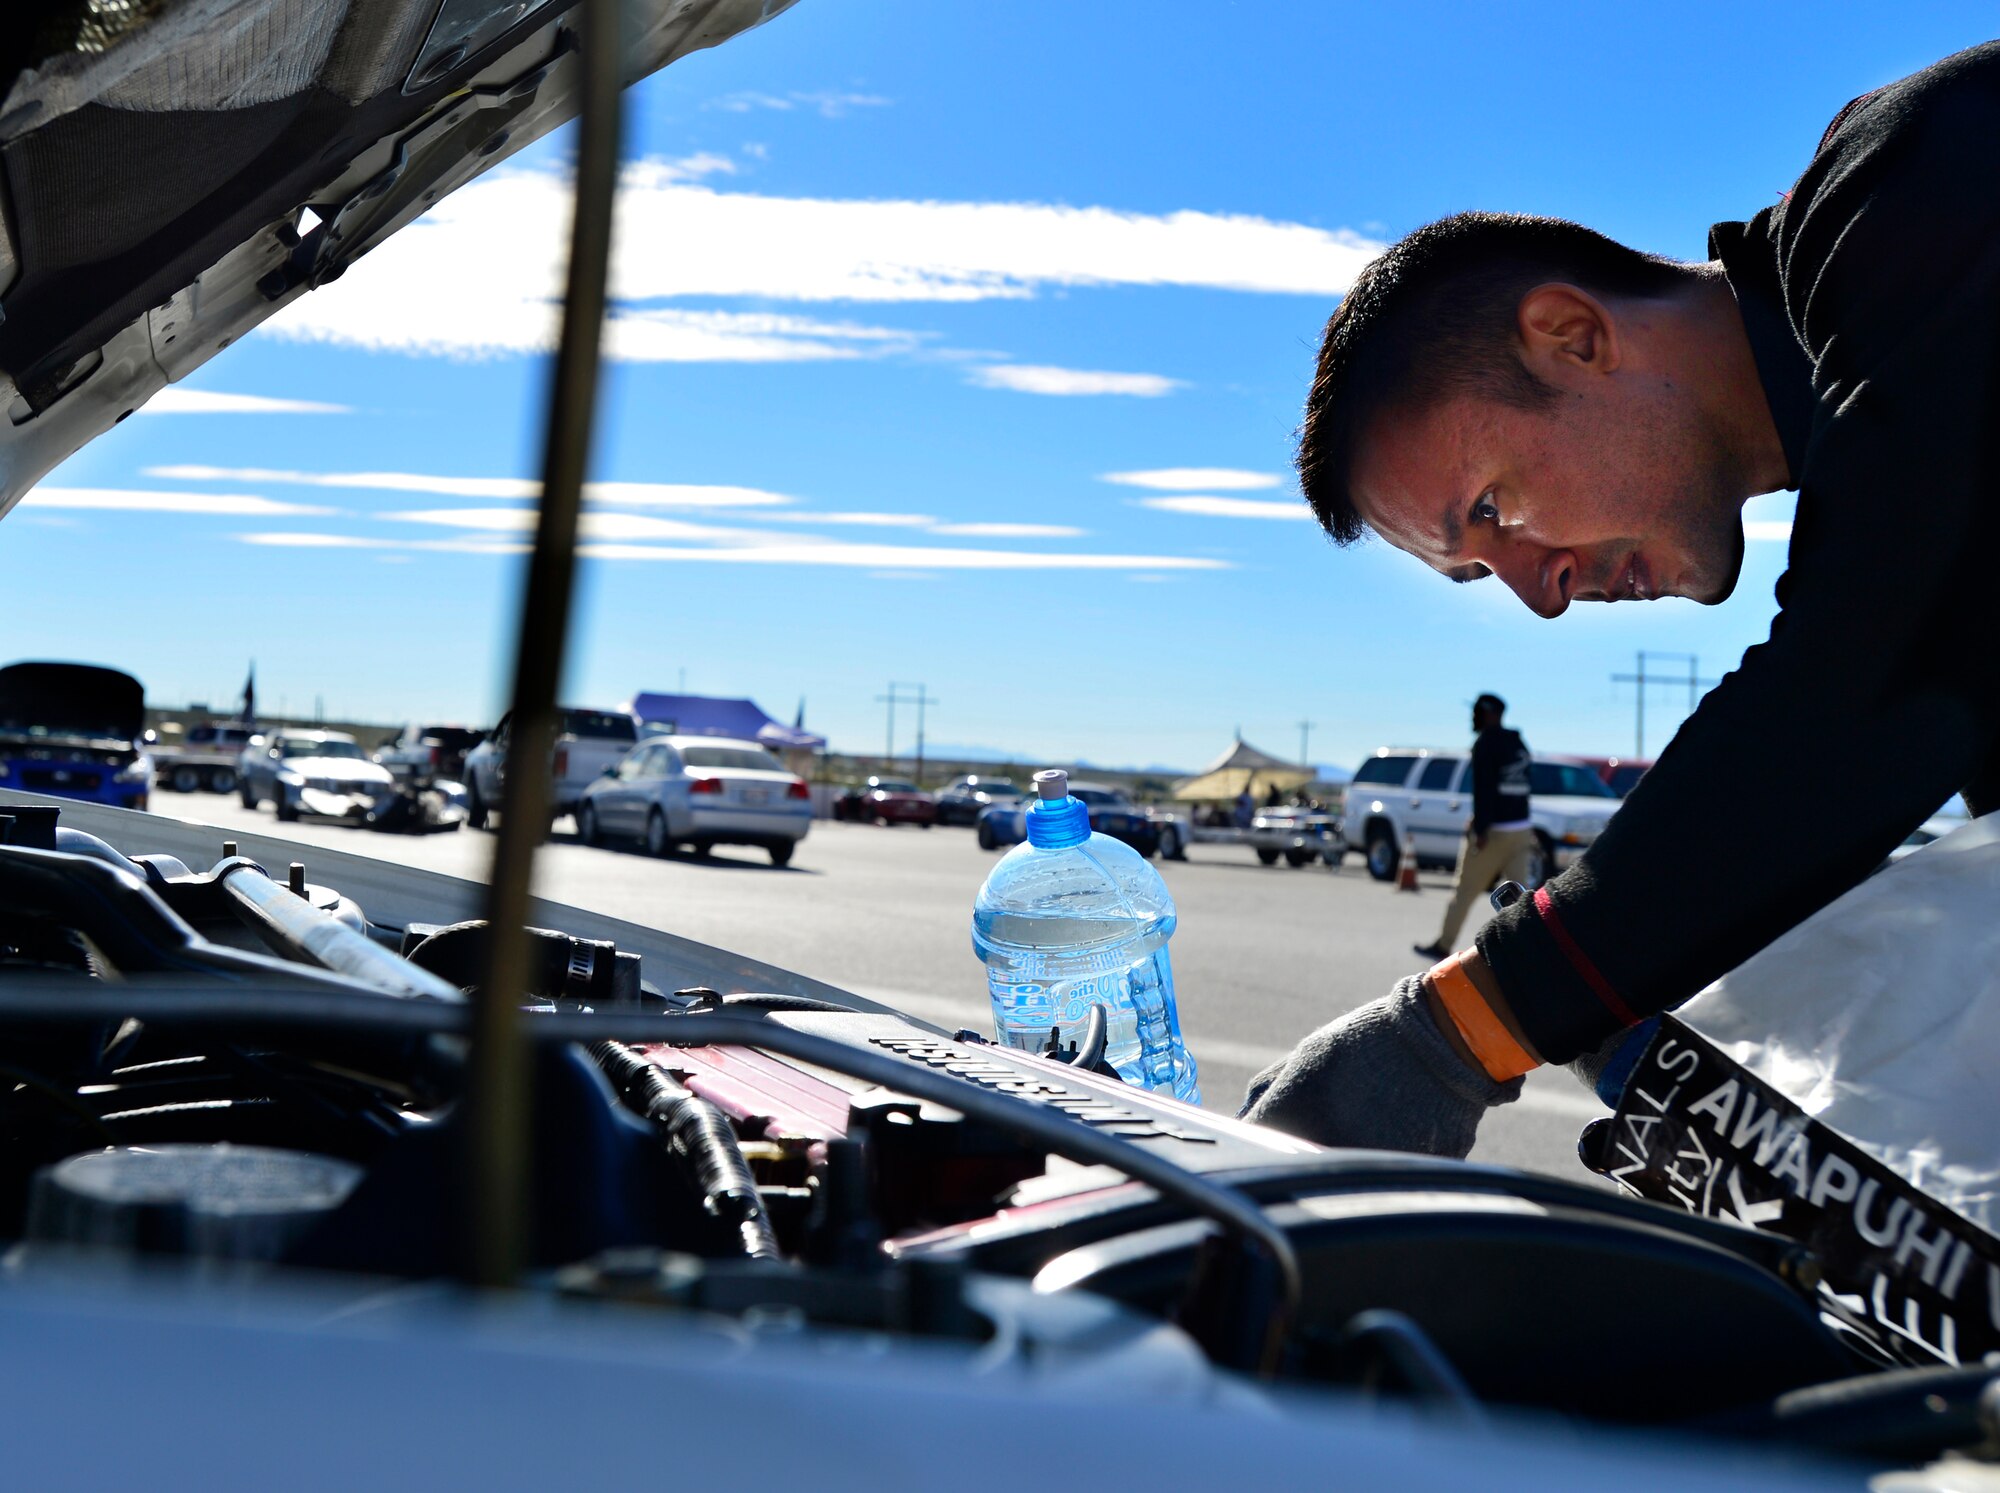 Tech. Sgt. Gabriel, a 432nd Wing/432nd Air Expeditionary Wing MQ-9 Reaper sensor operator, inspects his Mitsubishi Lancer Evolution at the Spring Mountain Raceway Nov. 1, 2015, in Pahrump, Nevada. Gabriel has owned and modified his Evolution for over five years. (U.S. Air Force photo/Airman 1st Class Christian Clausen)